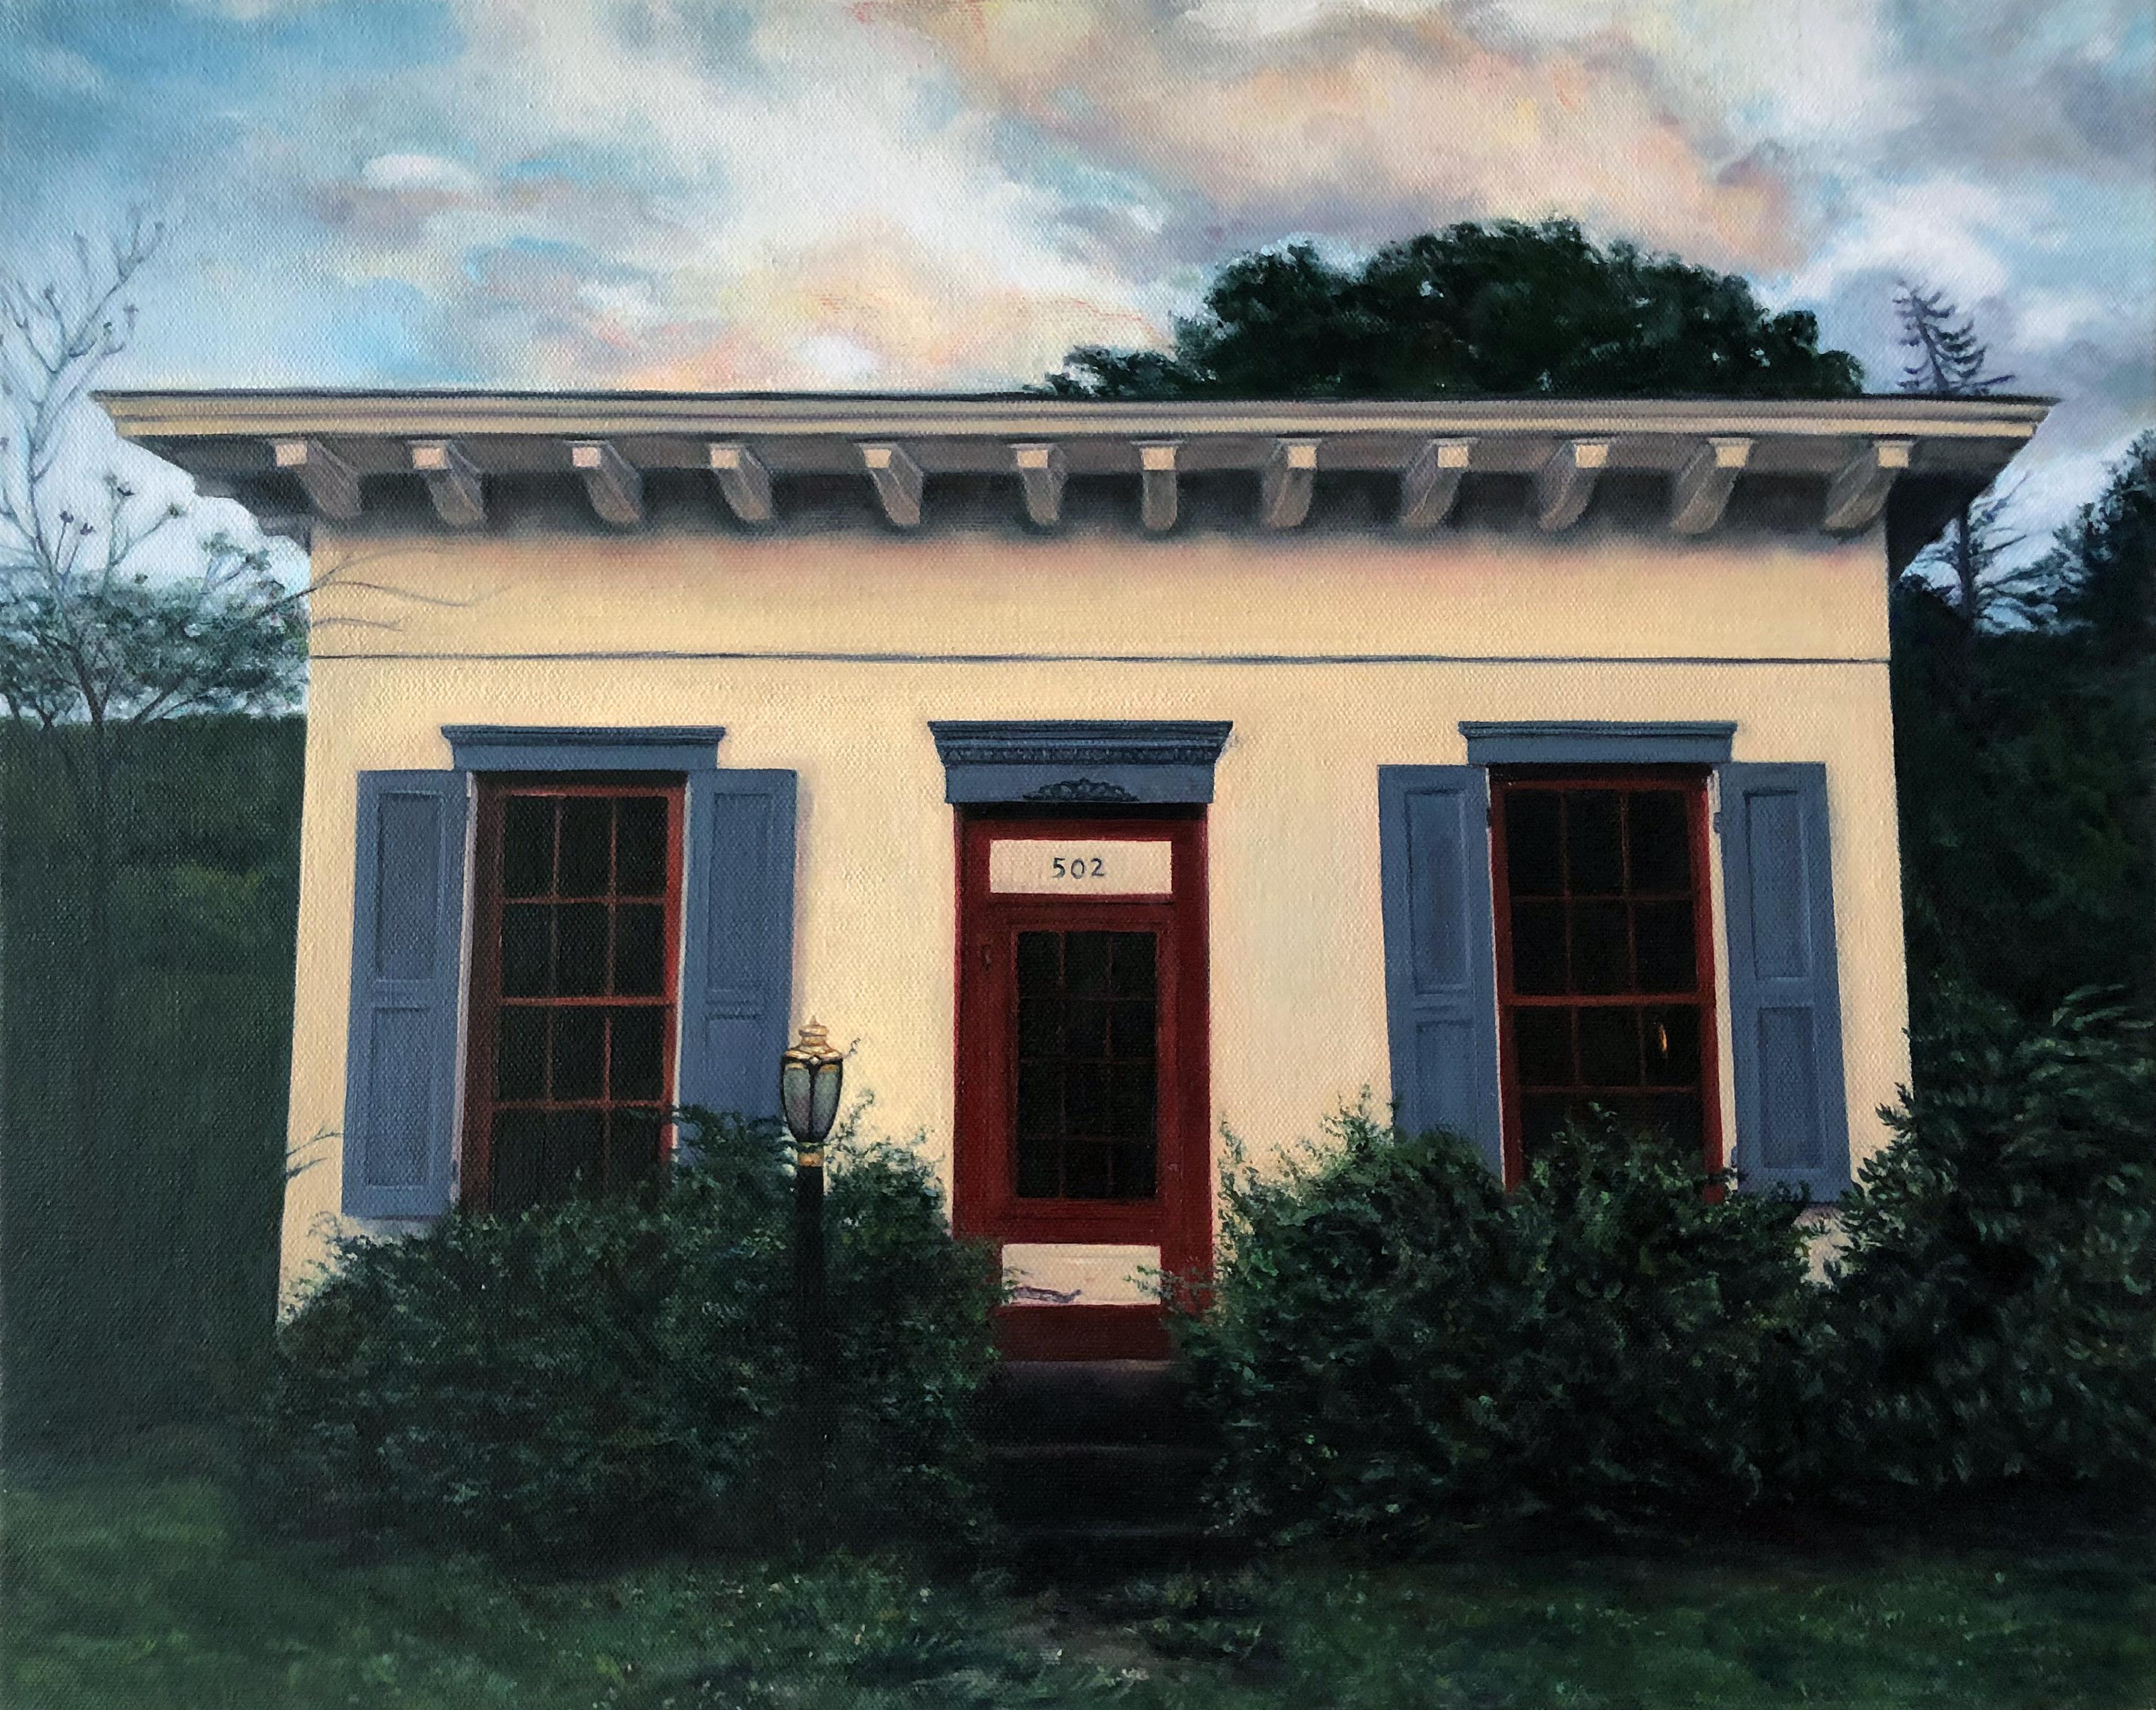 Edie Nadelhaft Interior Painting - Coudersport, PA - Contemporary landscape painting